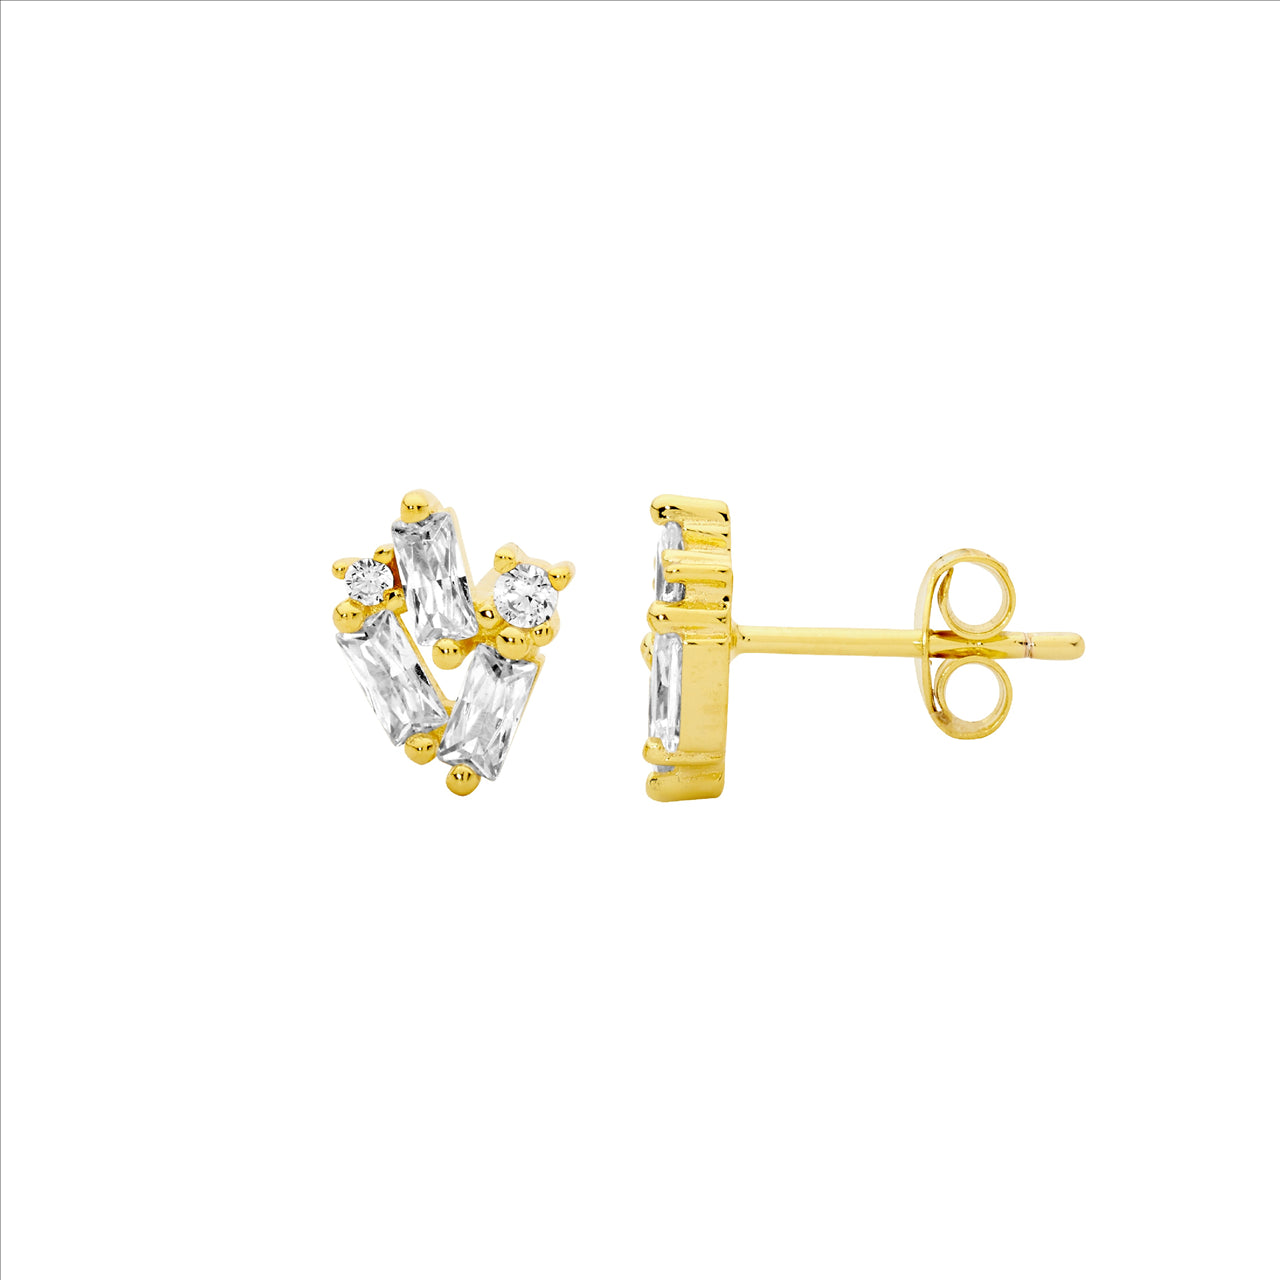 Scattered Baguette Stud Earrings - Yellow Gold.